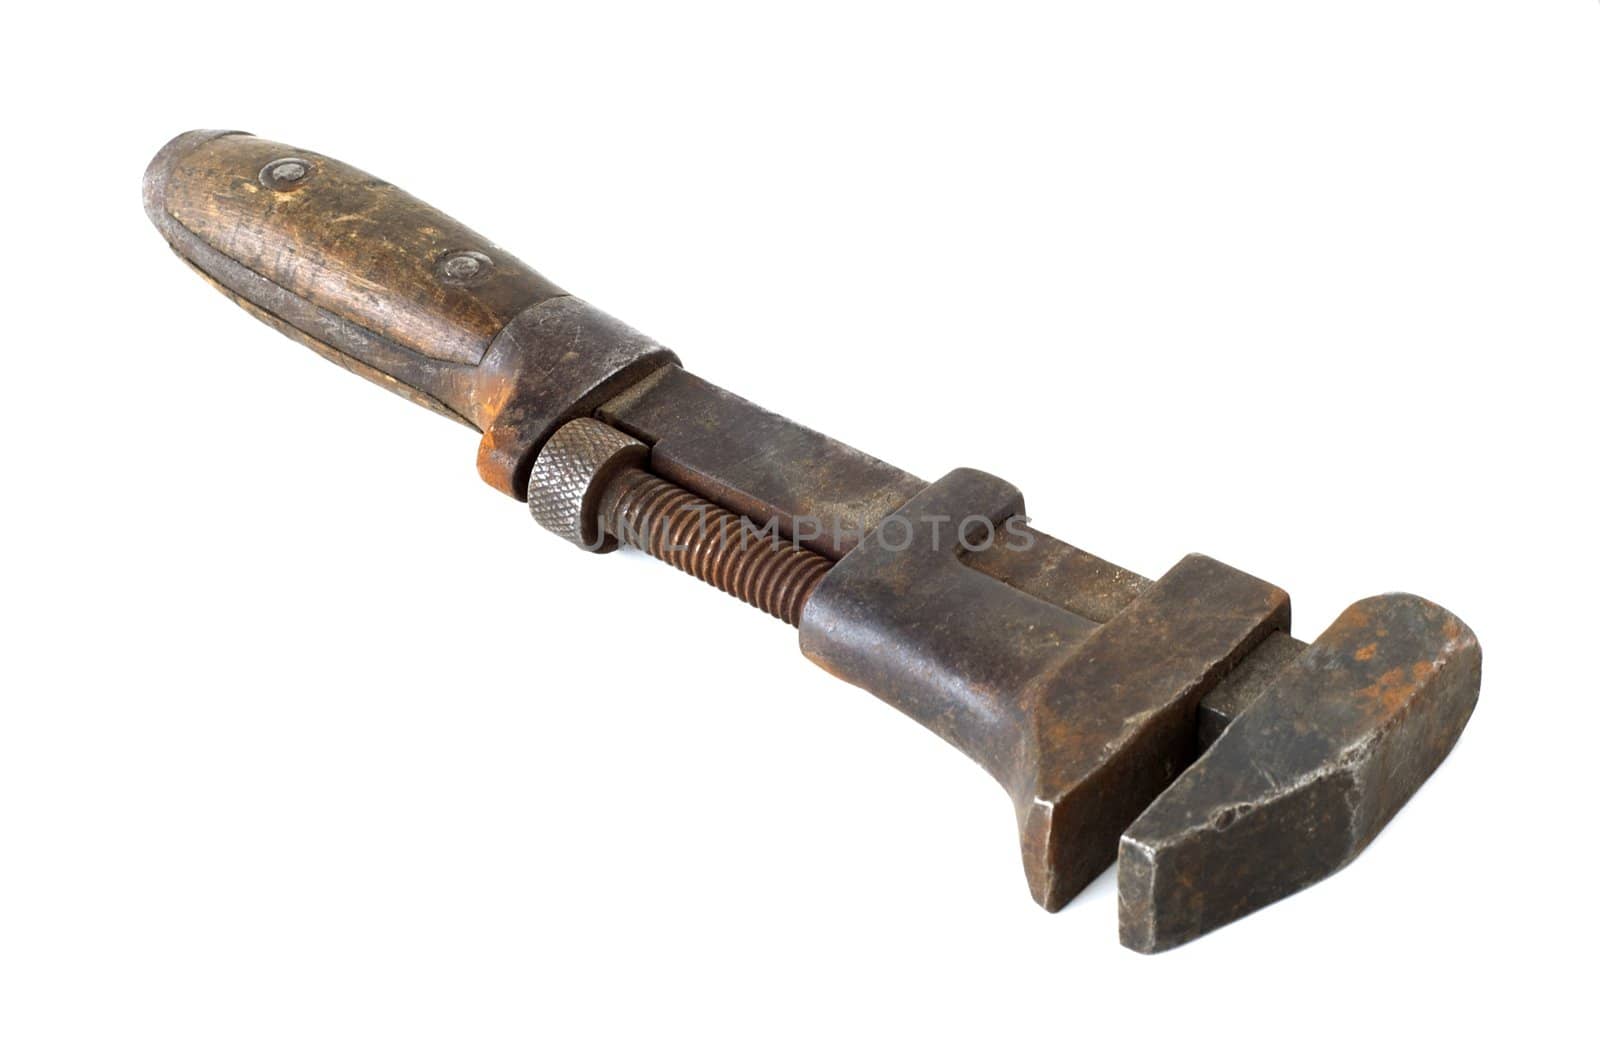 Antique pipe wrench used by a plumber or pipefitter.